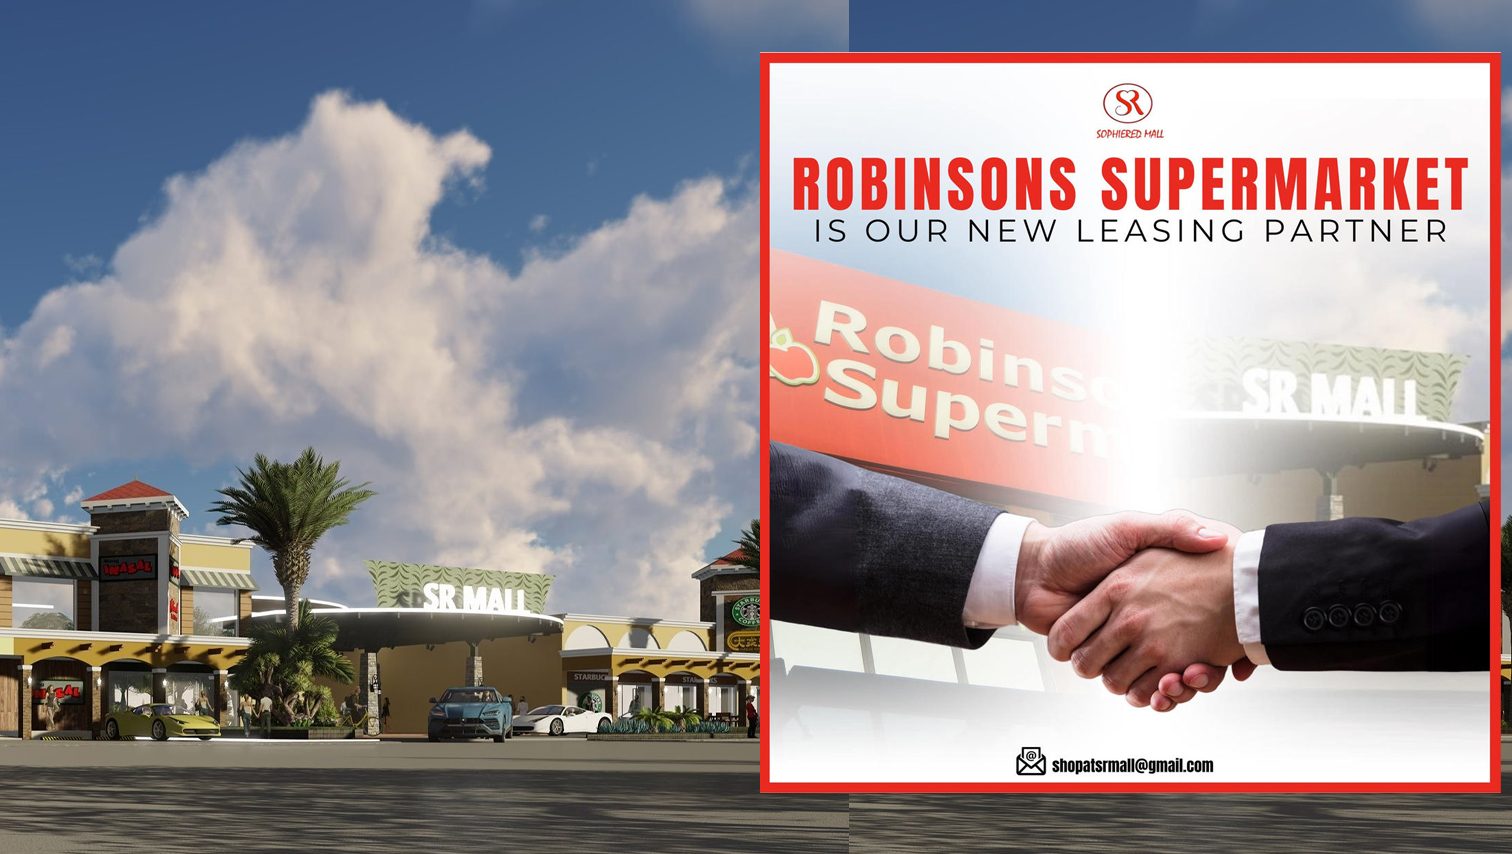 Robinsons Supermarket soon at SophieRed Mall in Jasaan